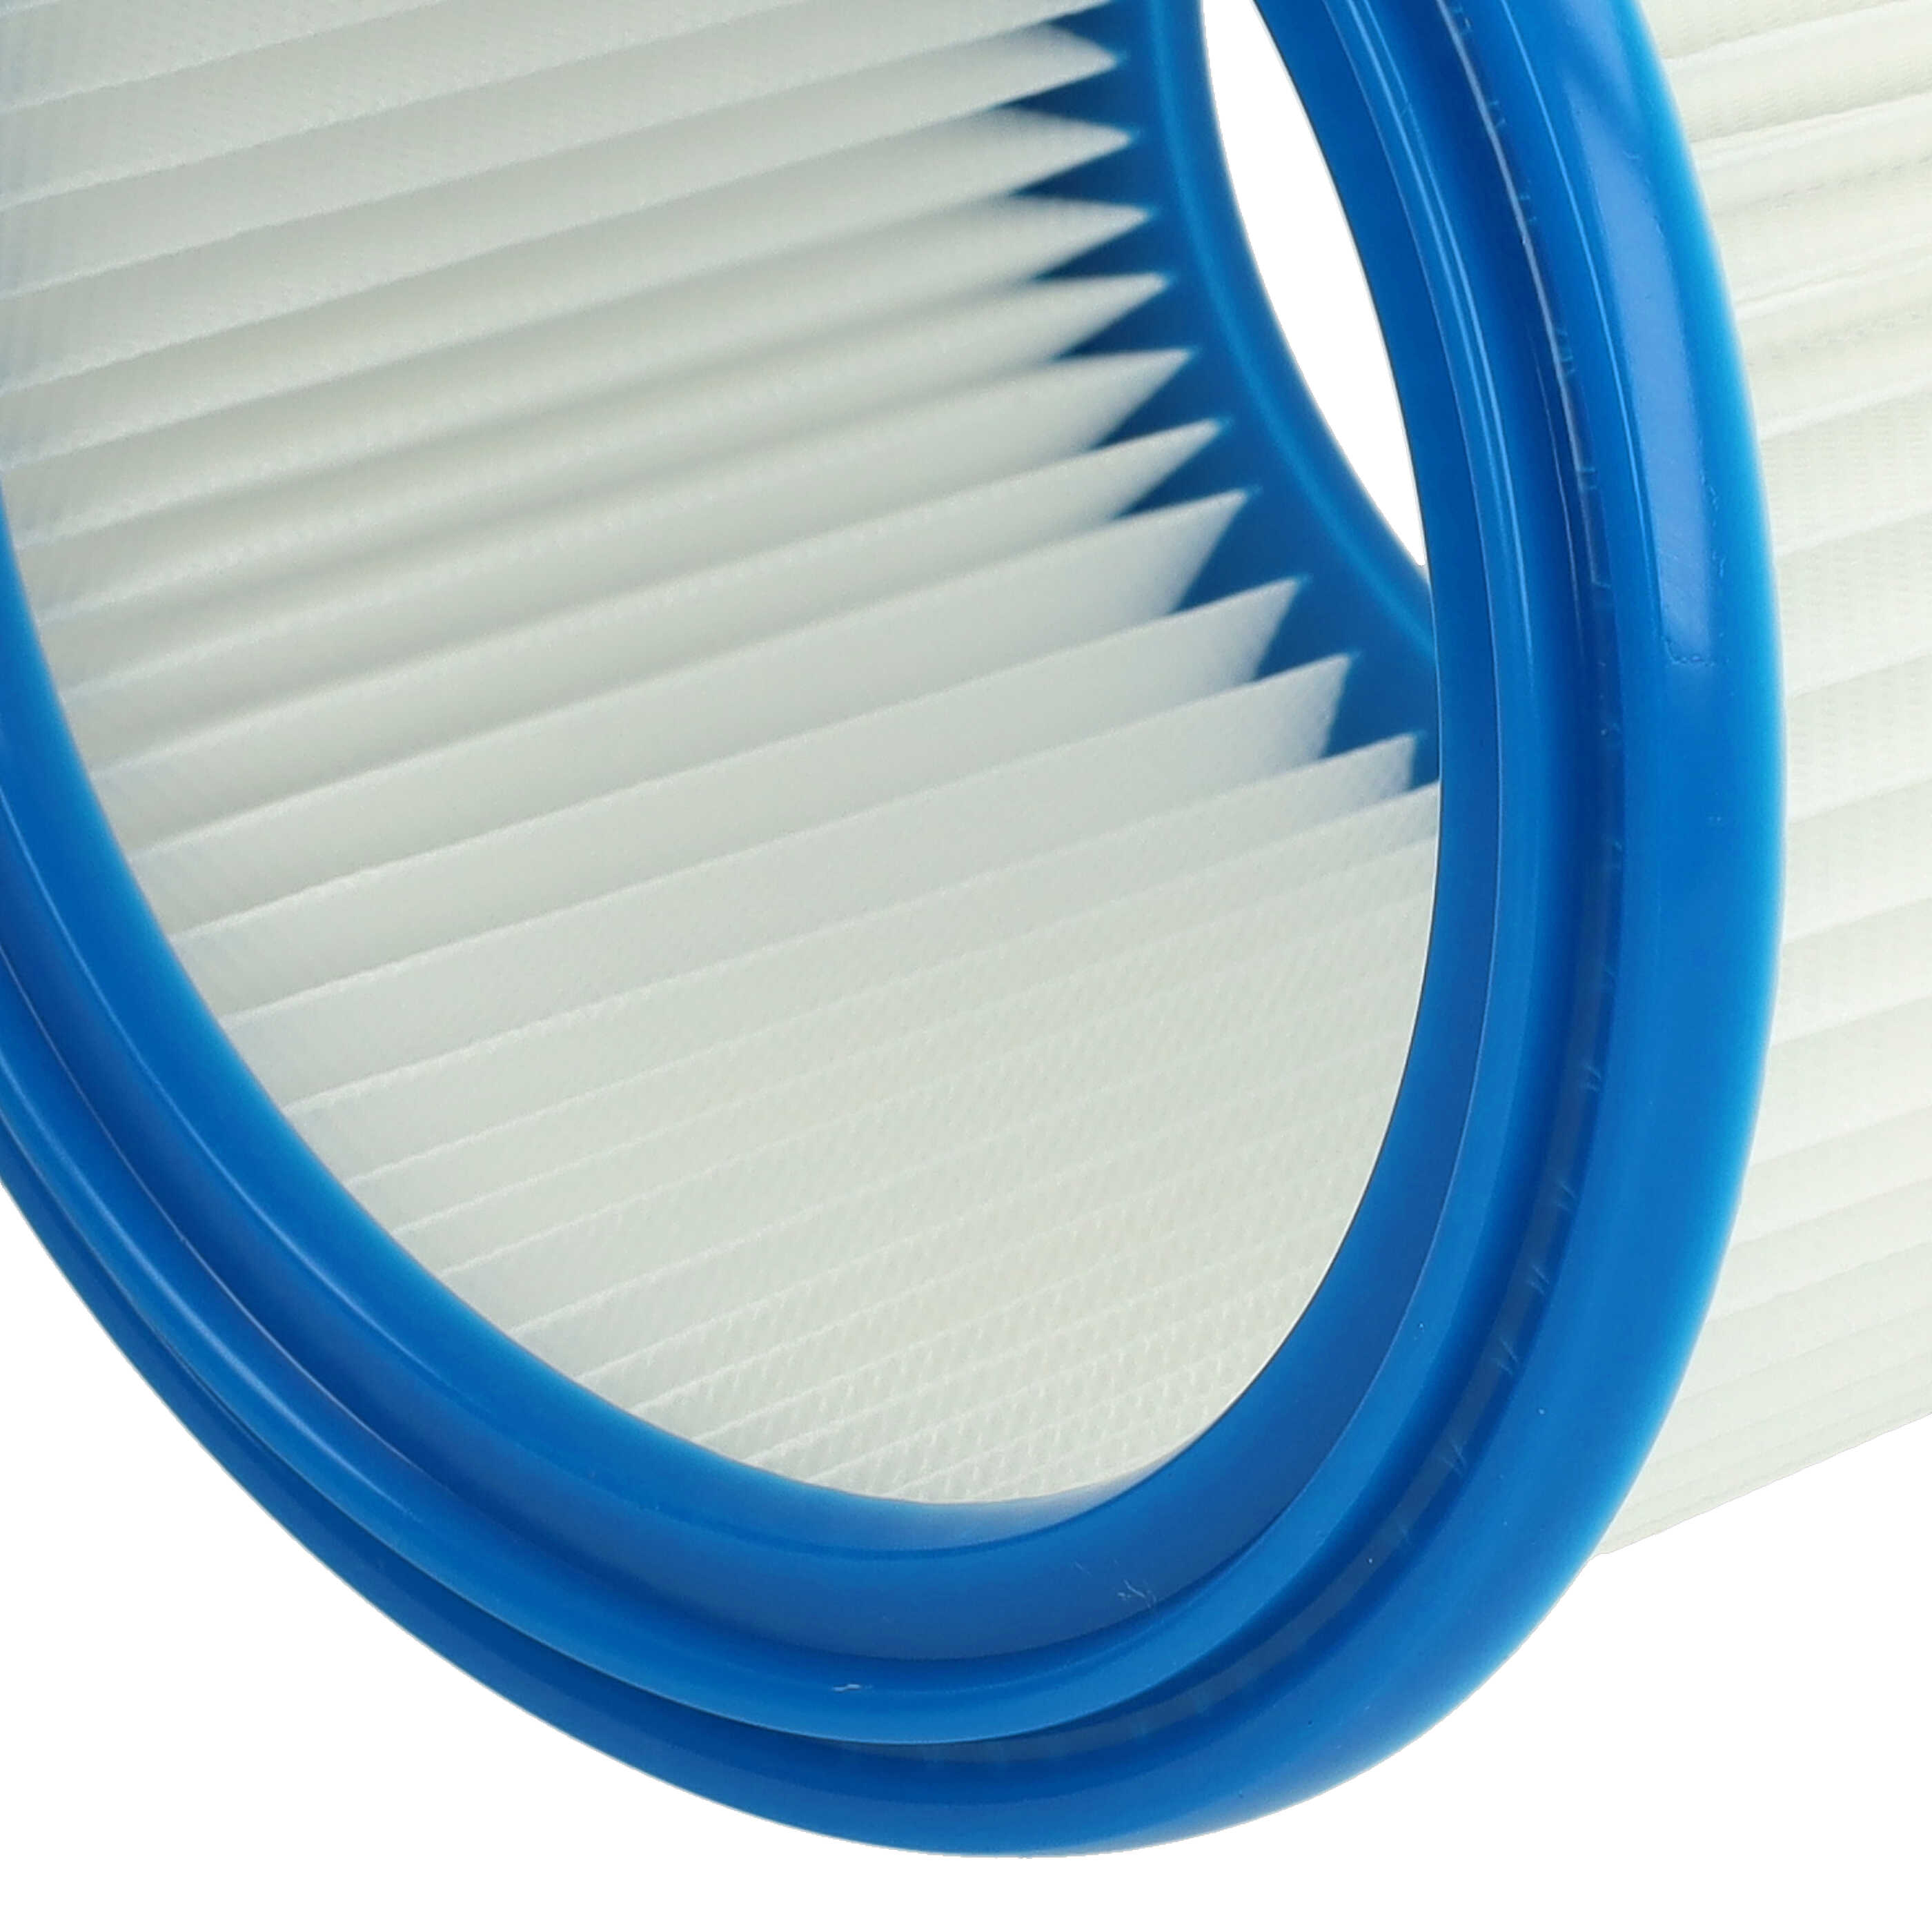 10x round filter replaces Bosch 2607432024 for BoschVacuum Cleaner, white / blue